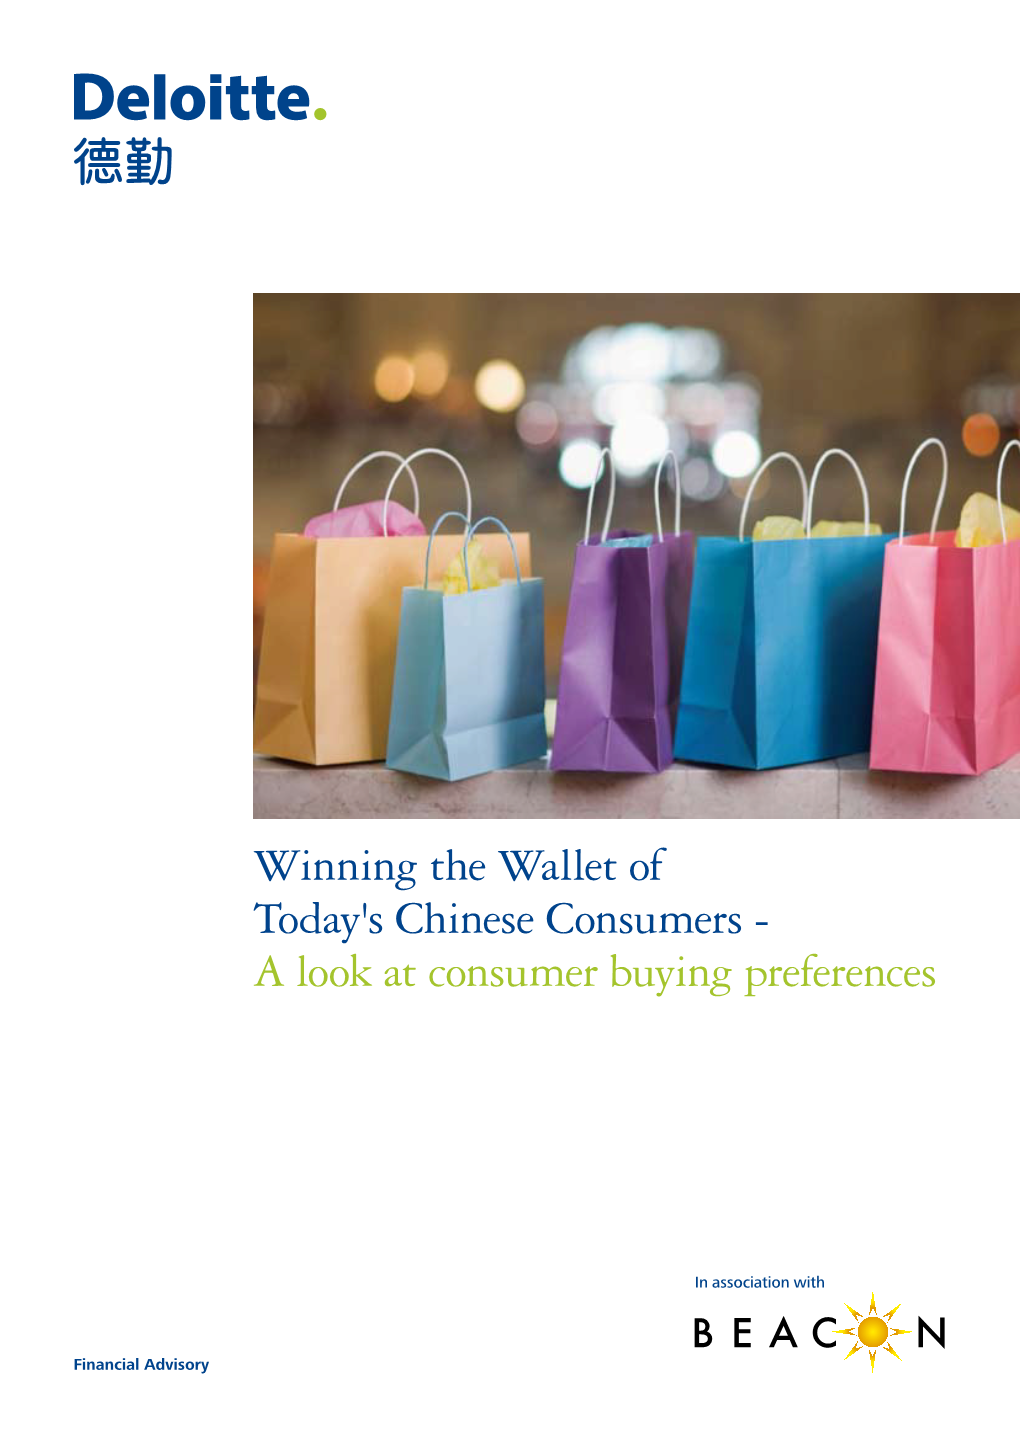 Winning the Wallet of Today's Chinese Consumers - a Look at Consumer Buying Preferences